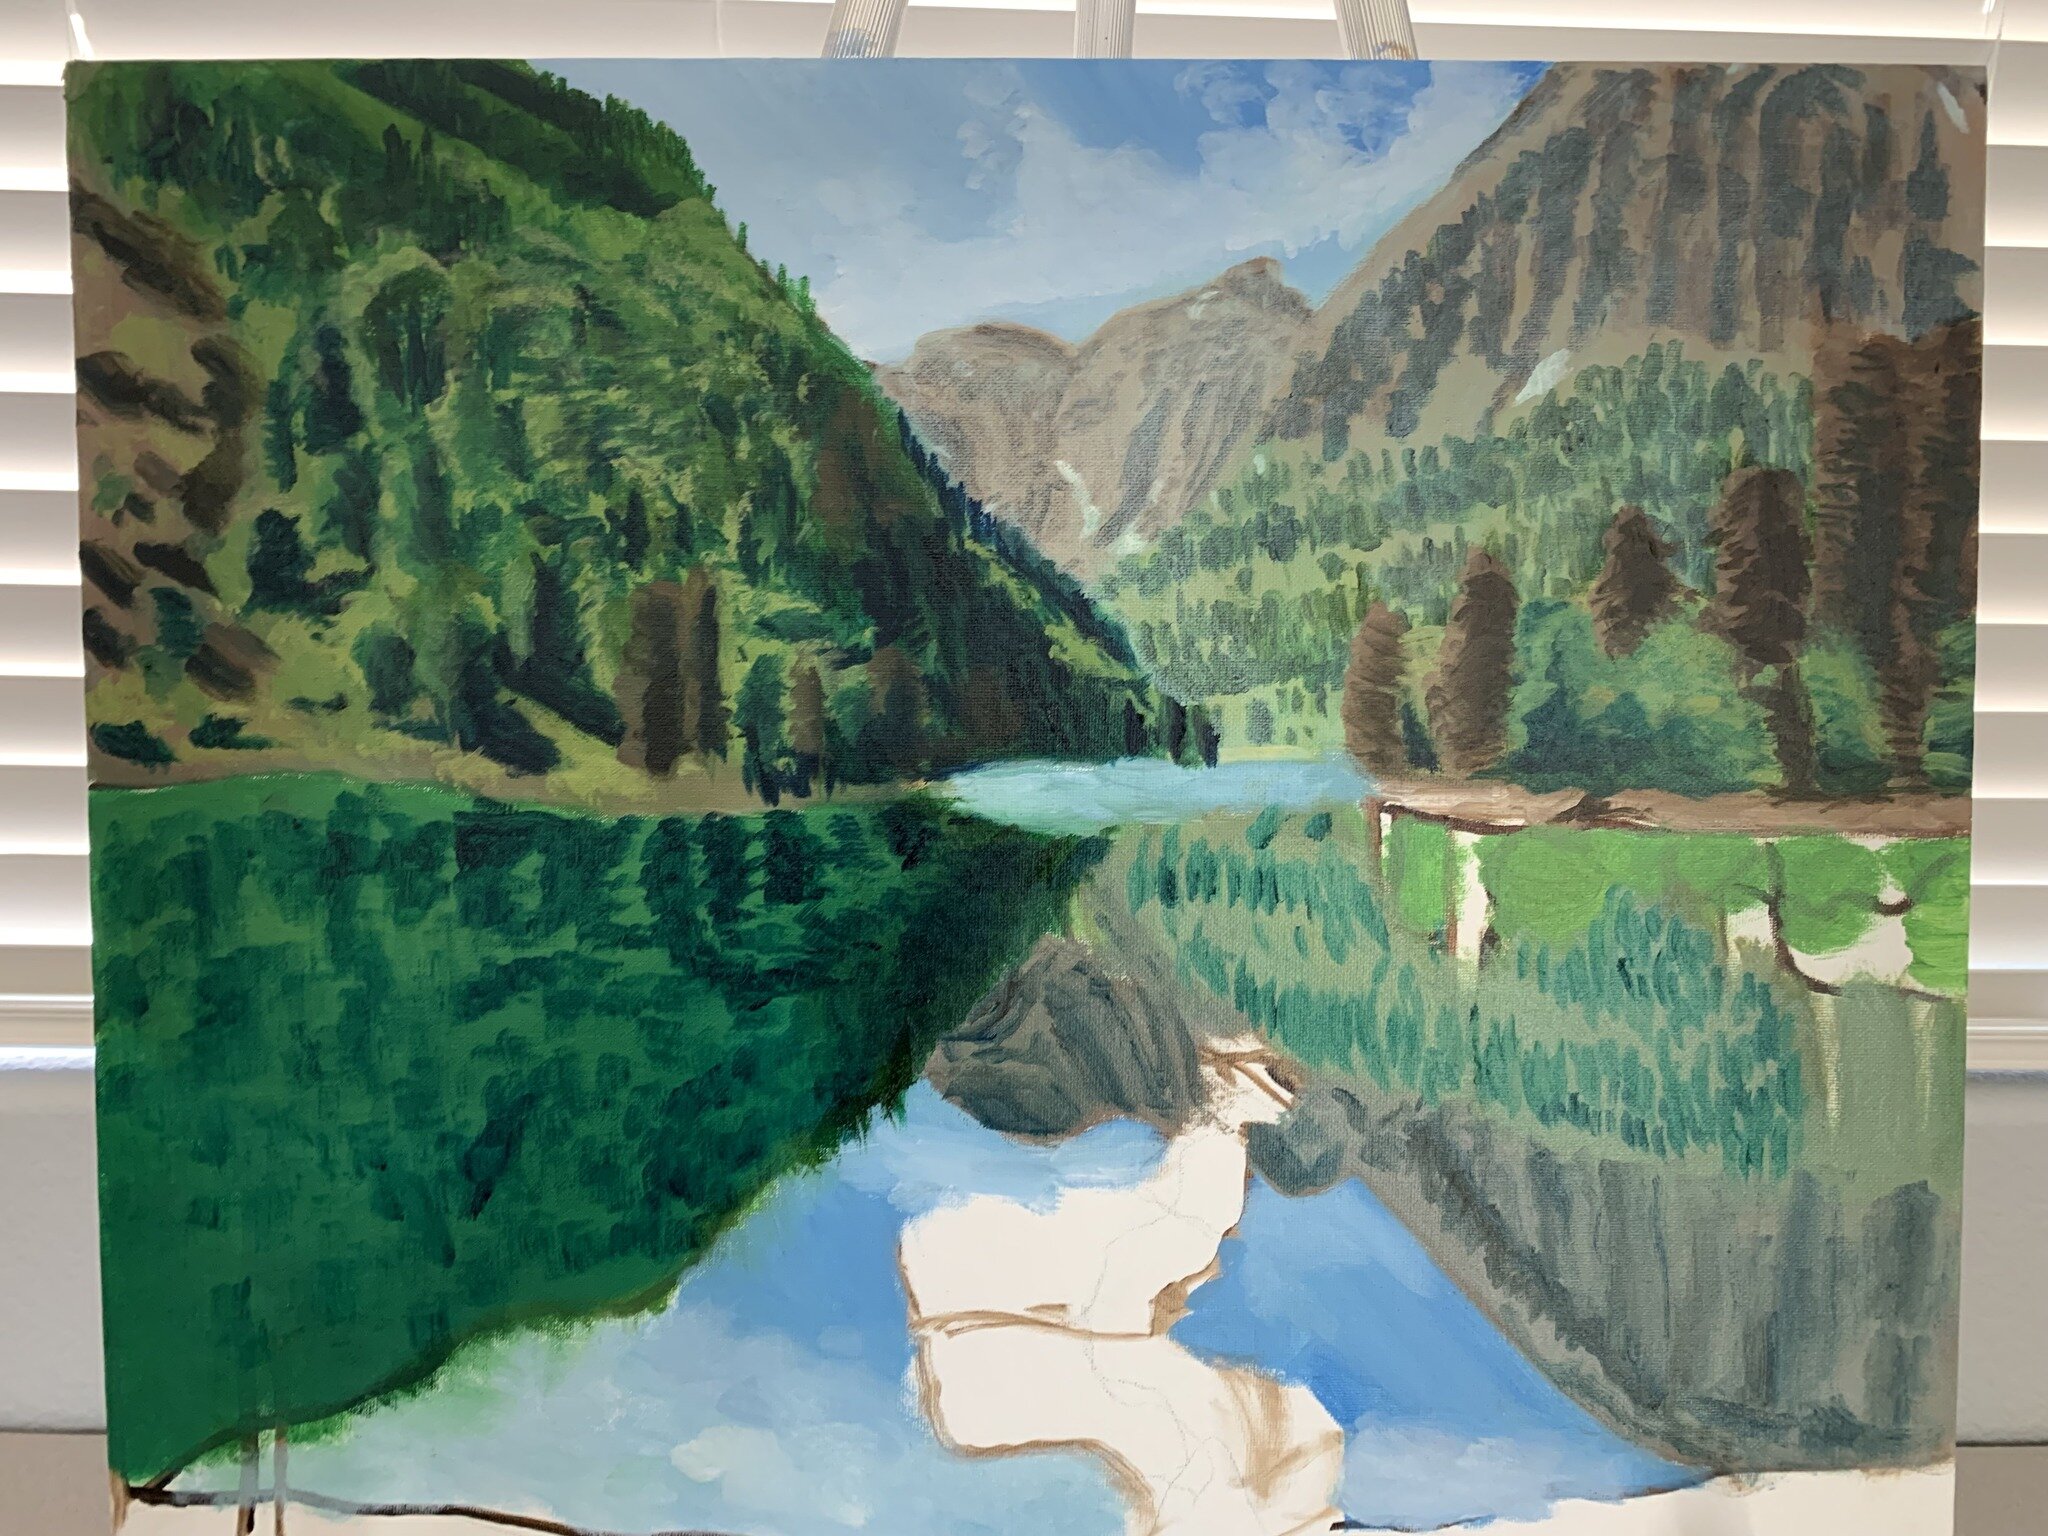 Take a look at my latest oil painting! I'm excited to share this stunning mountain landscape with an elk and a breathtaking reflection in the water. If you love unique and original artwork, this piece is for you! It's available for sale now, so messa